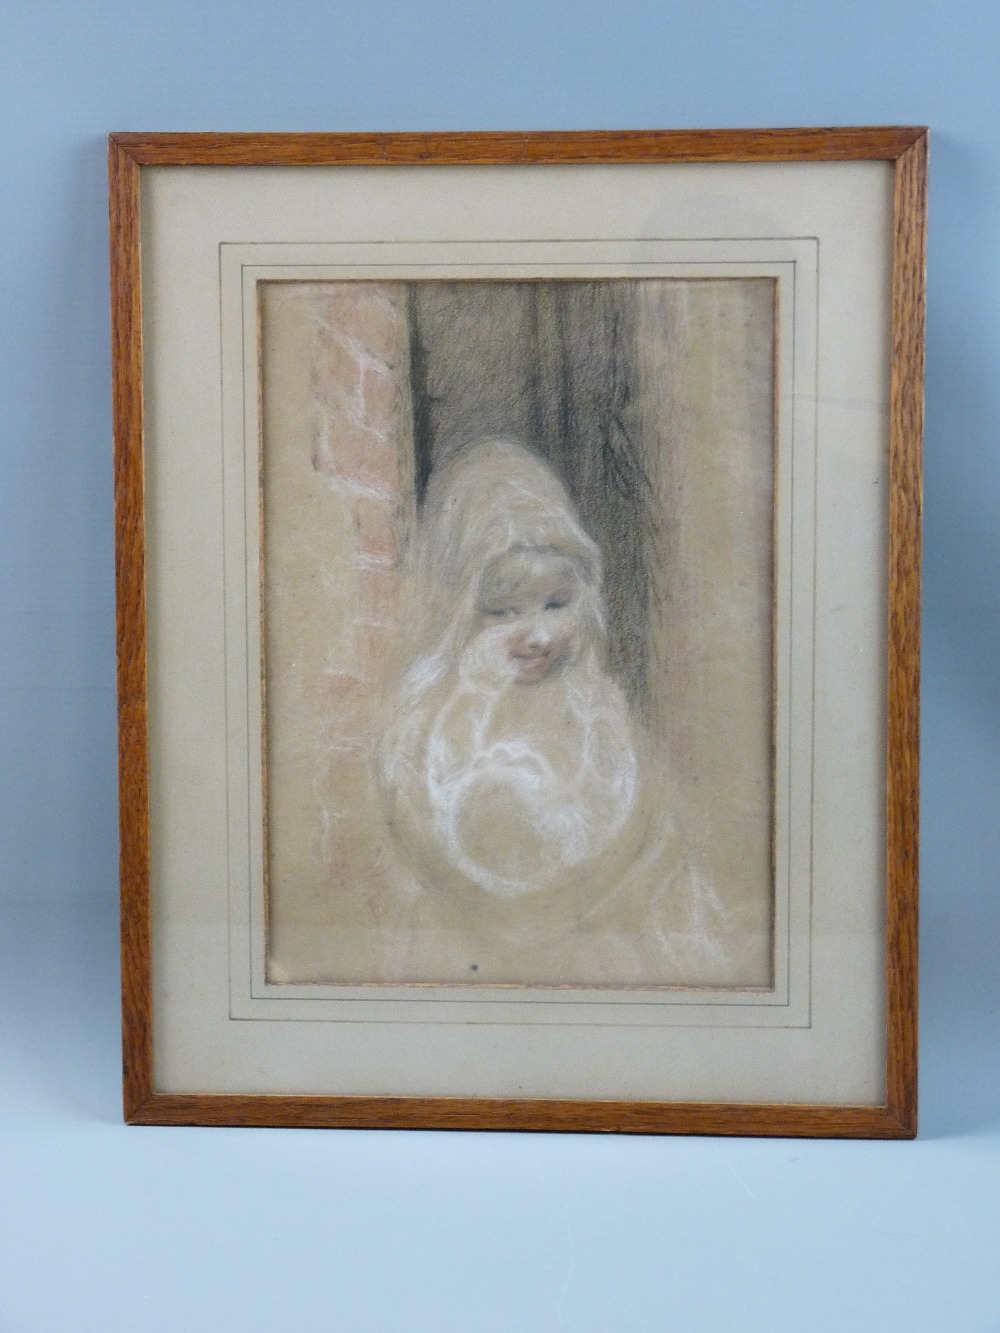 WILLIAM ASCROFT mixed media - young girl with baby, entitled label verso 'Unfinished Study of Girl